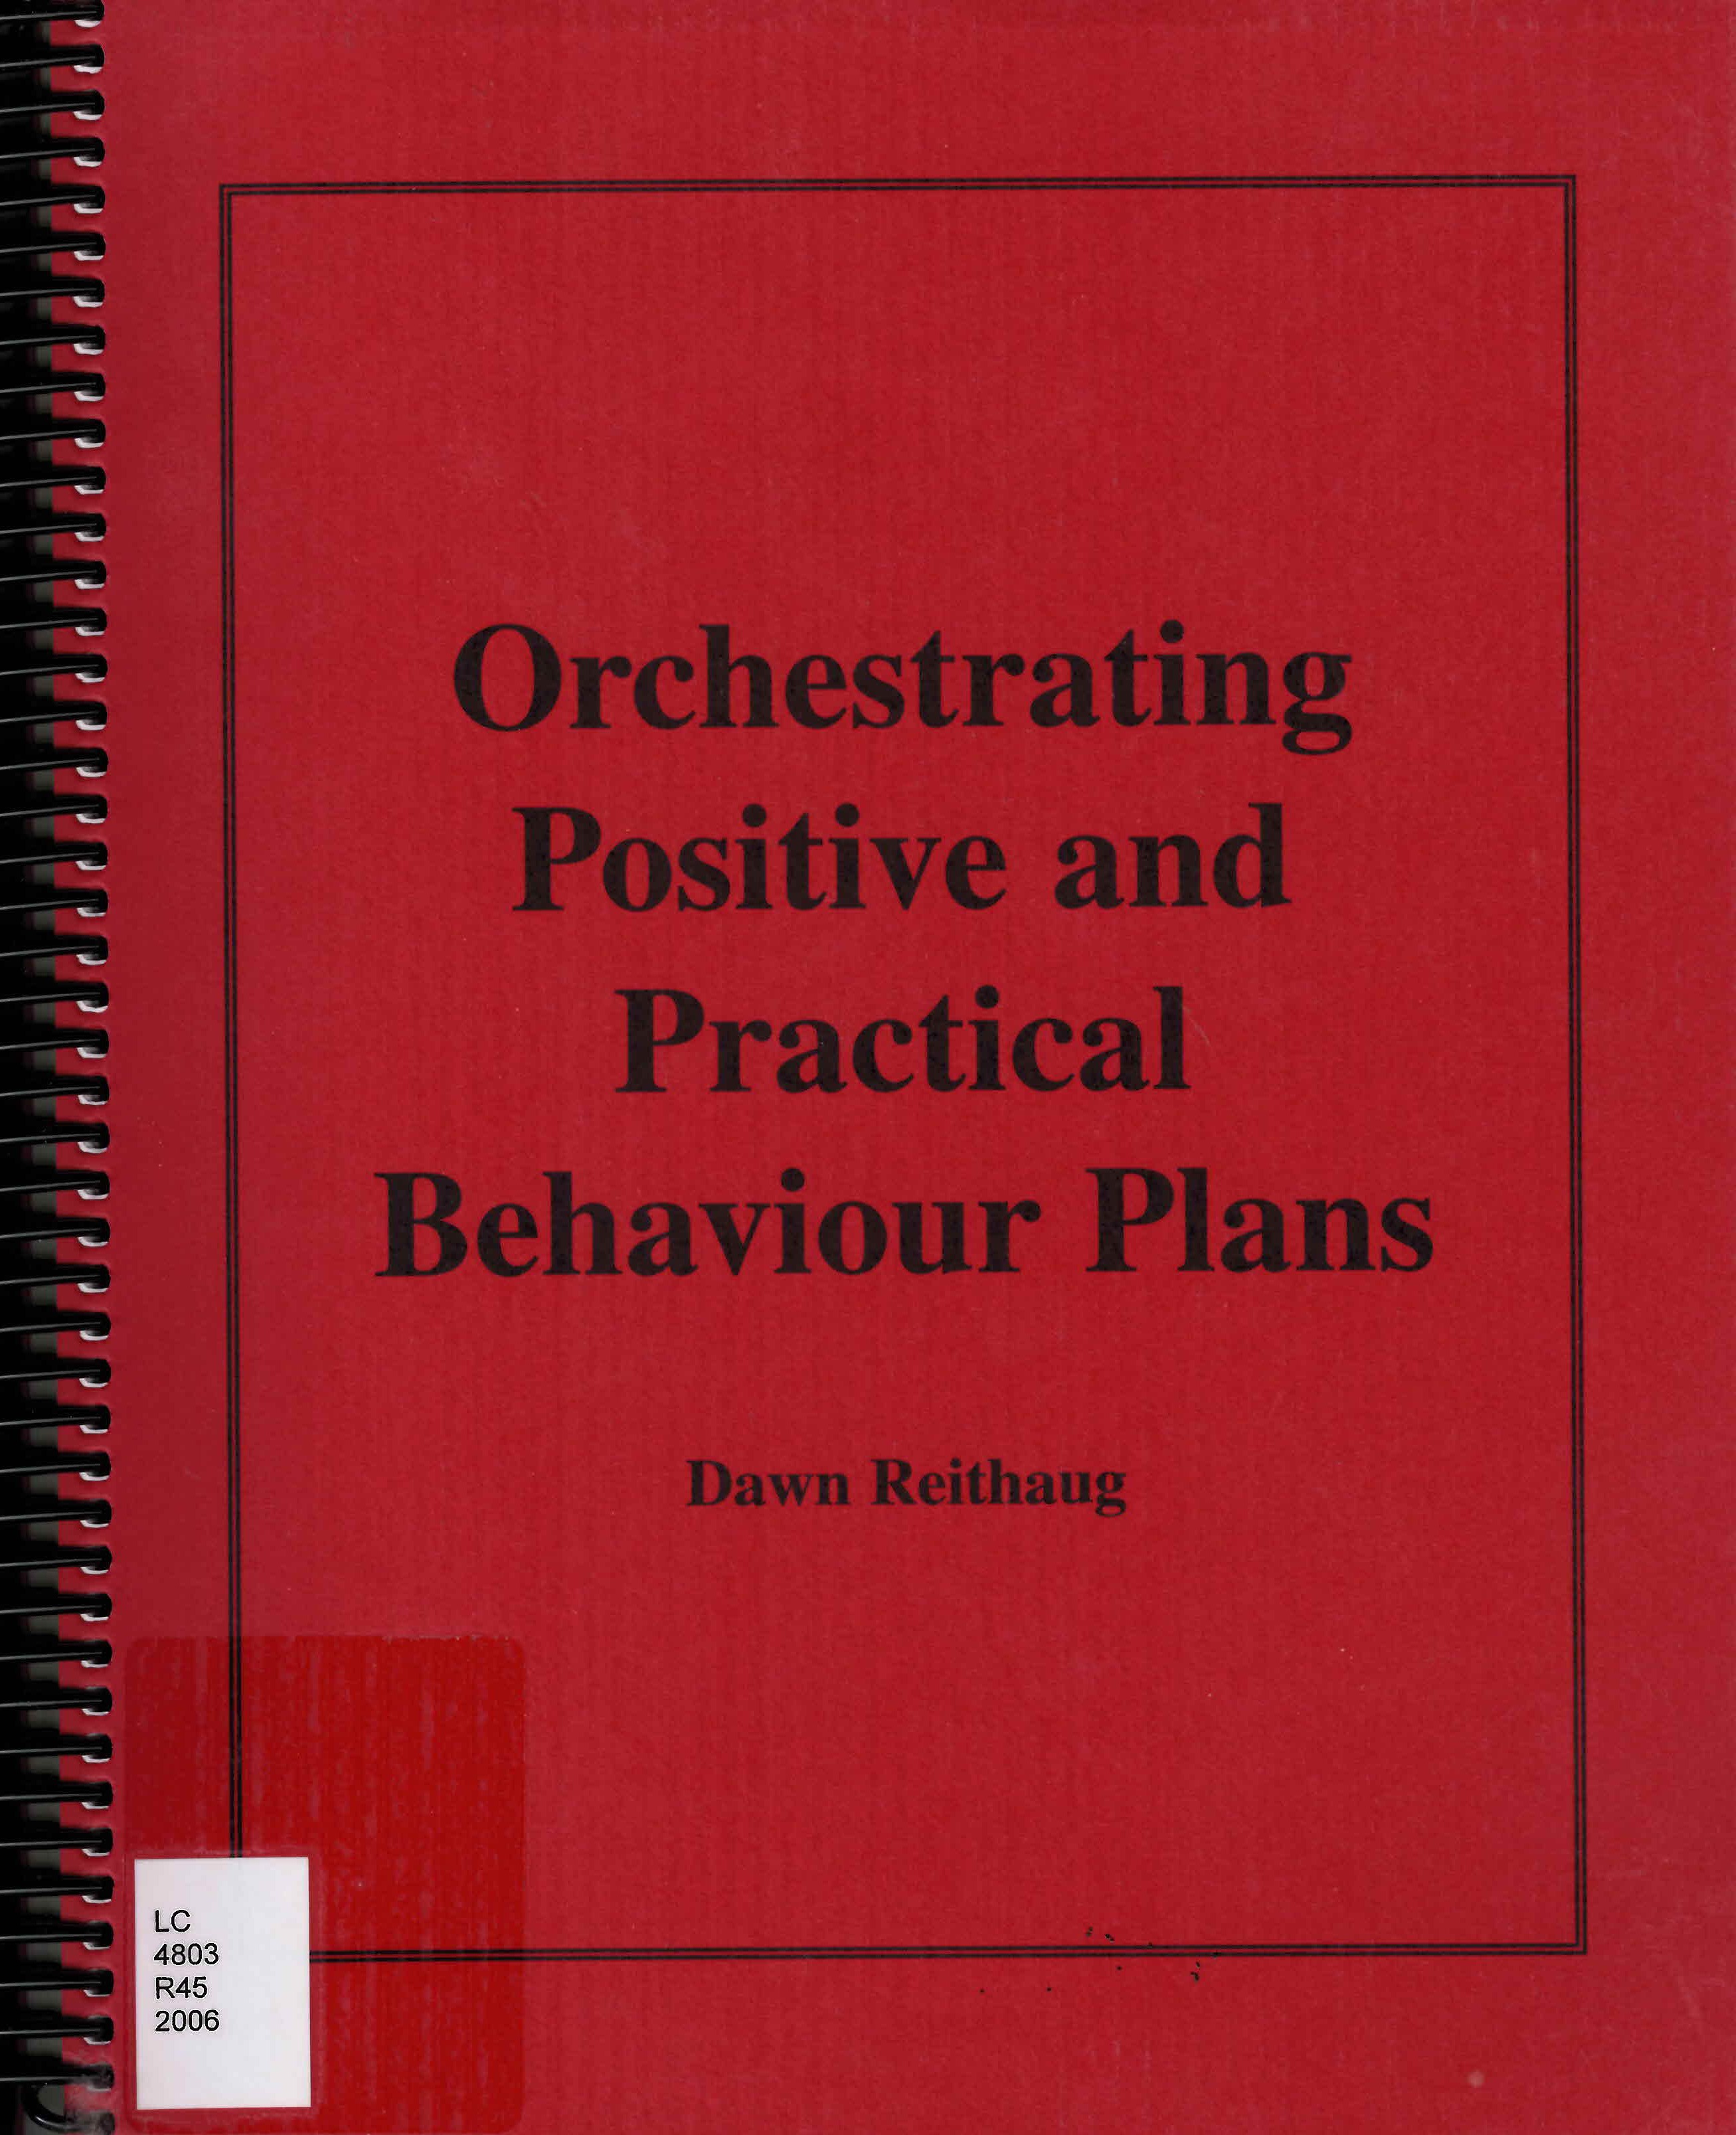 Orchestrating positive and practical behaviour plans